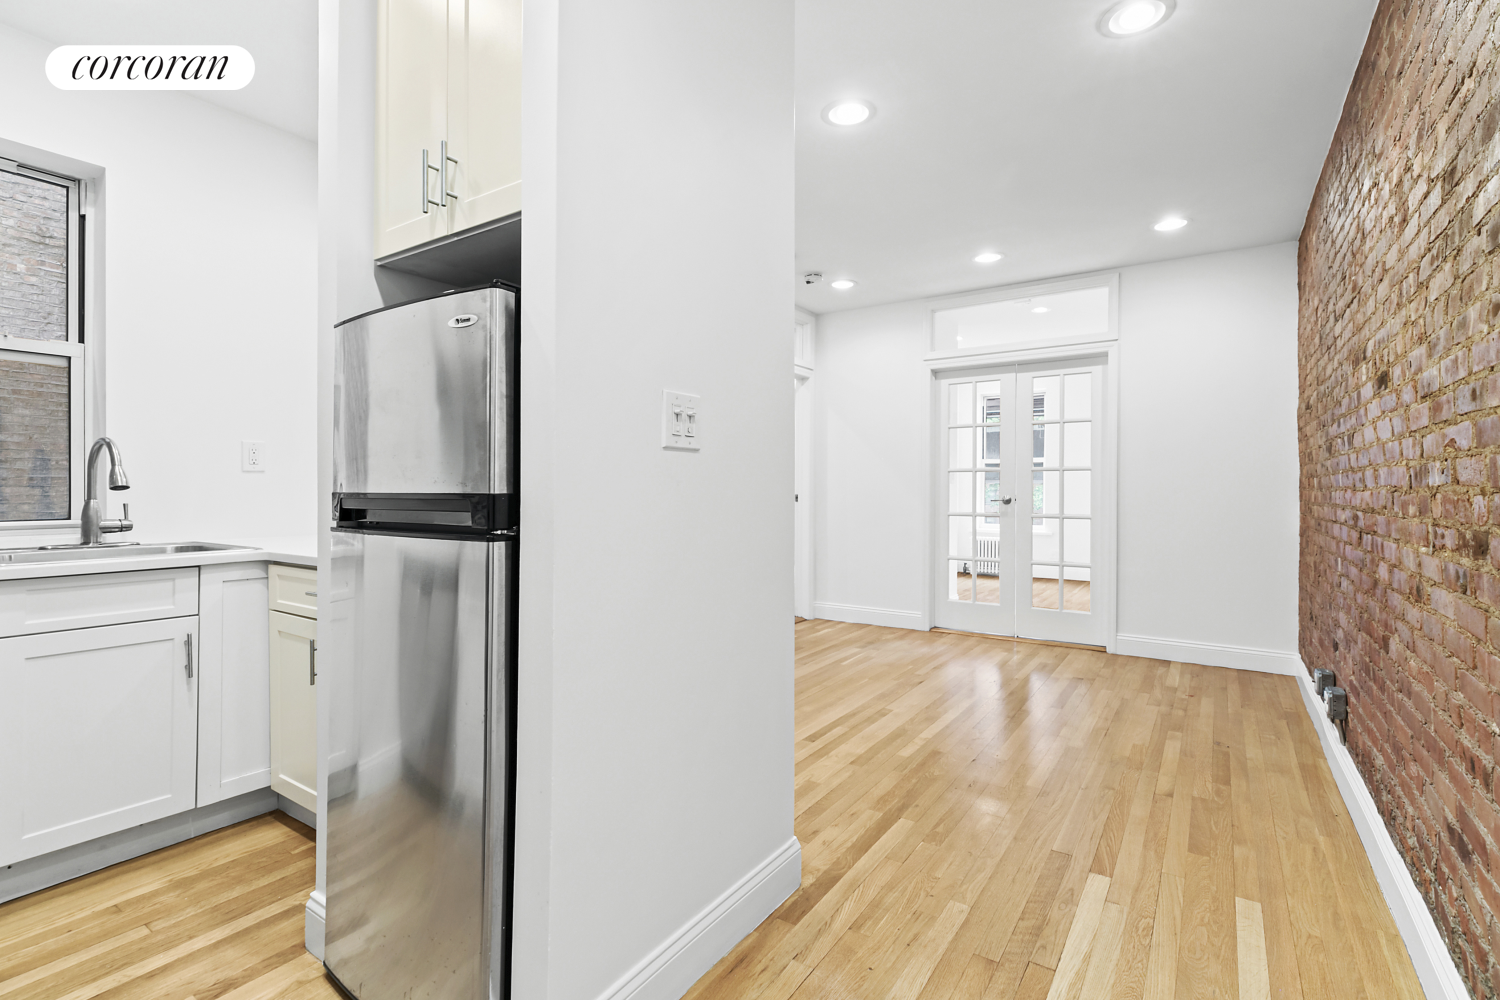 3161 Broadway 3A, Morningside Heights, Upper Manhattan, NYC - 2 Bedrooms  
1 Bathrooms  
4 Rooms - 